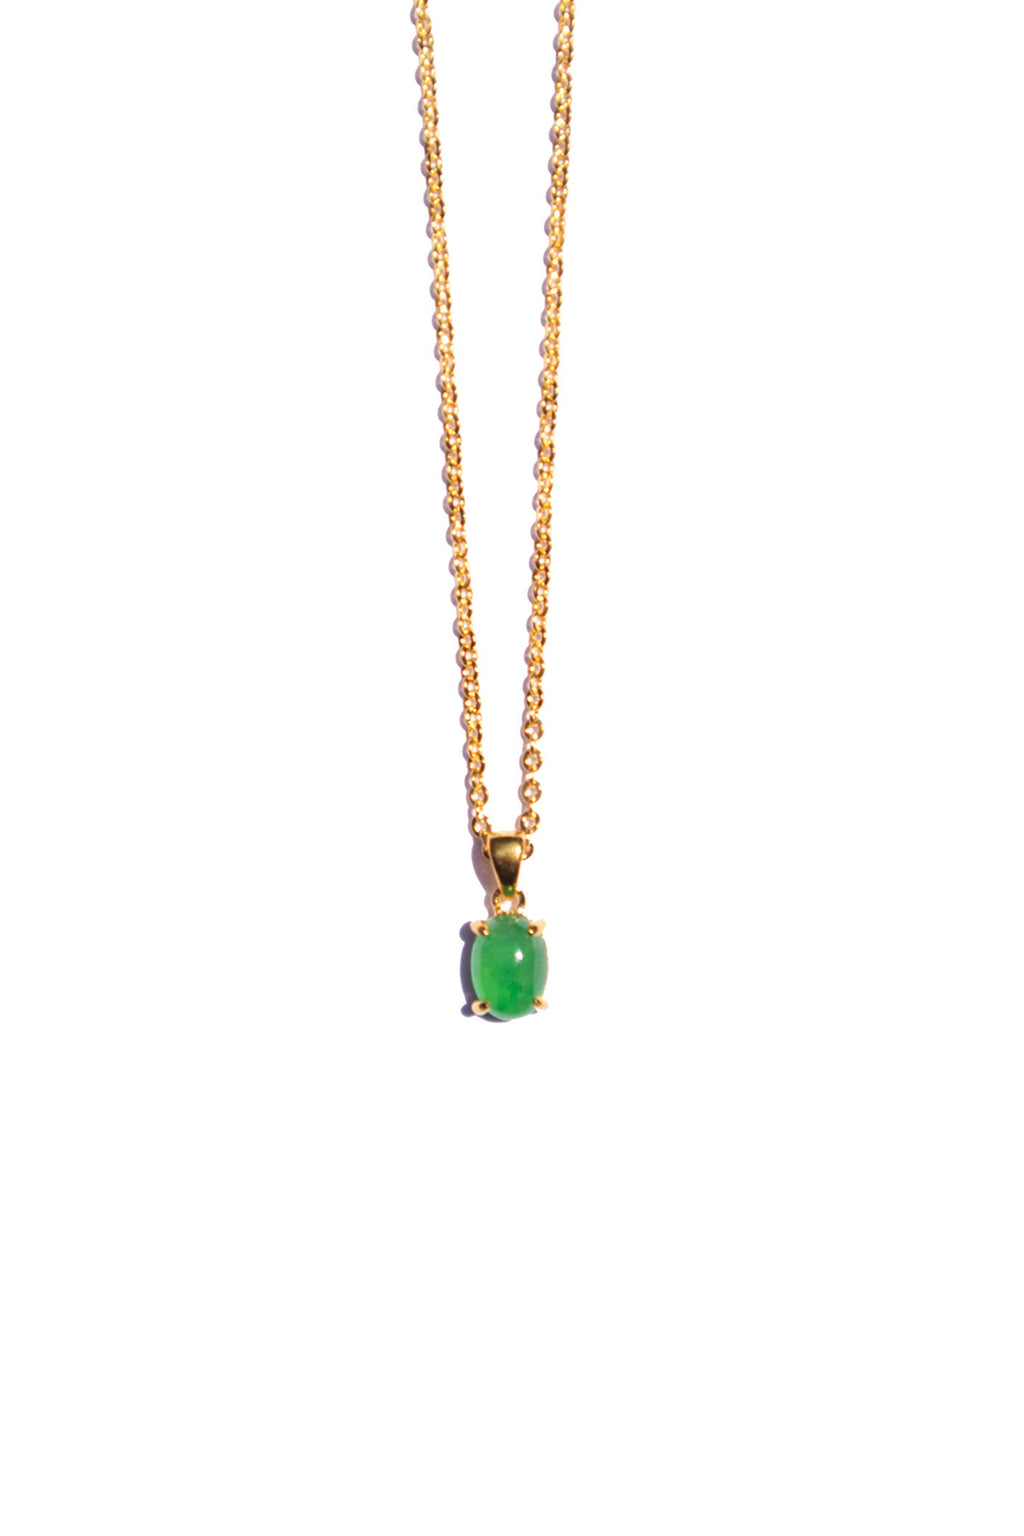 seree-atelier-collection-freya-necklace-imperial-green-jadeite-pendant-gold-plated-chain-2